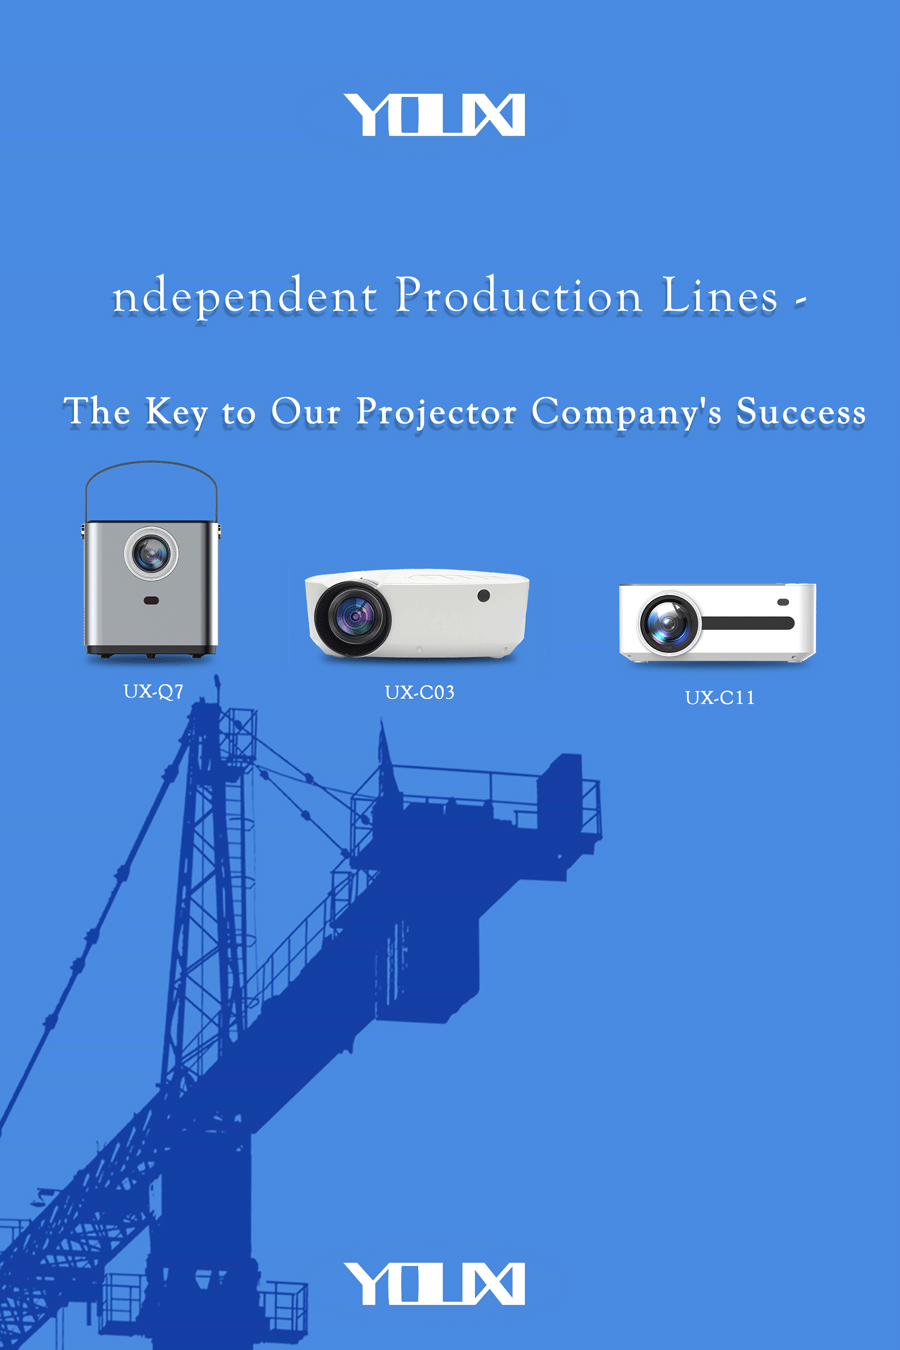 Independent Production Lines – The Key to Our Projector Company’s Success”